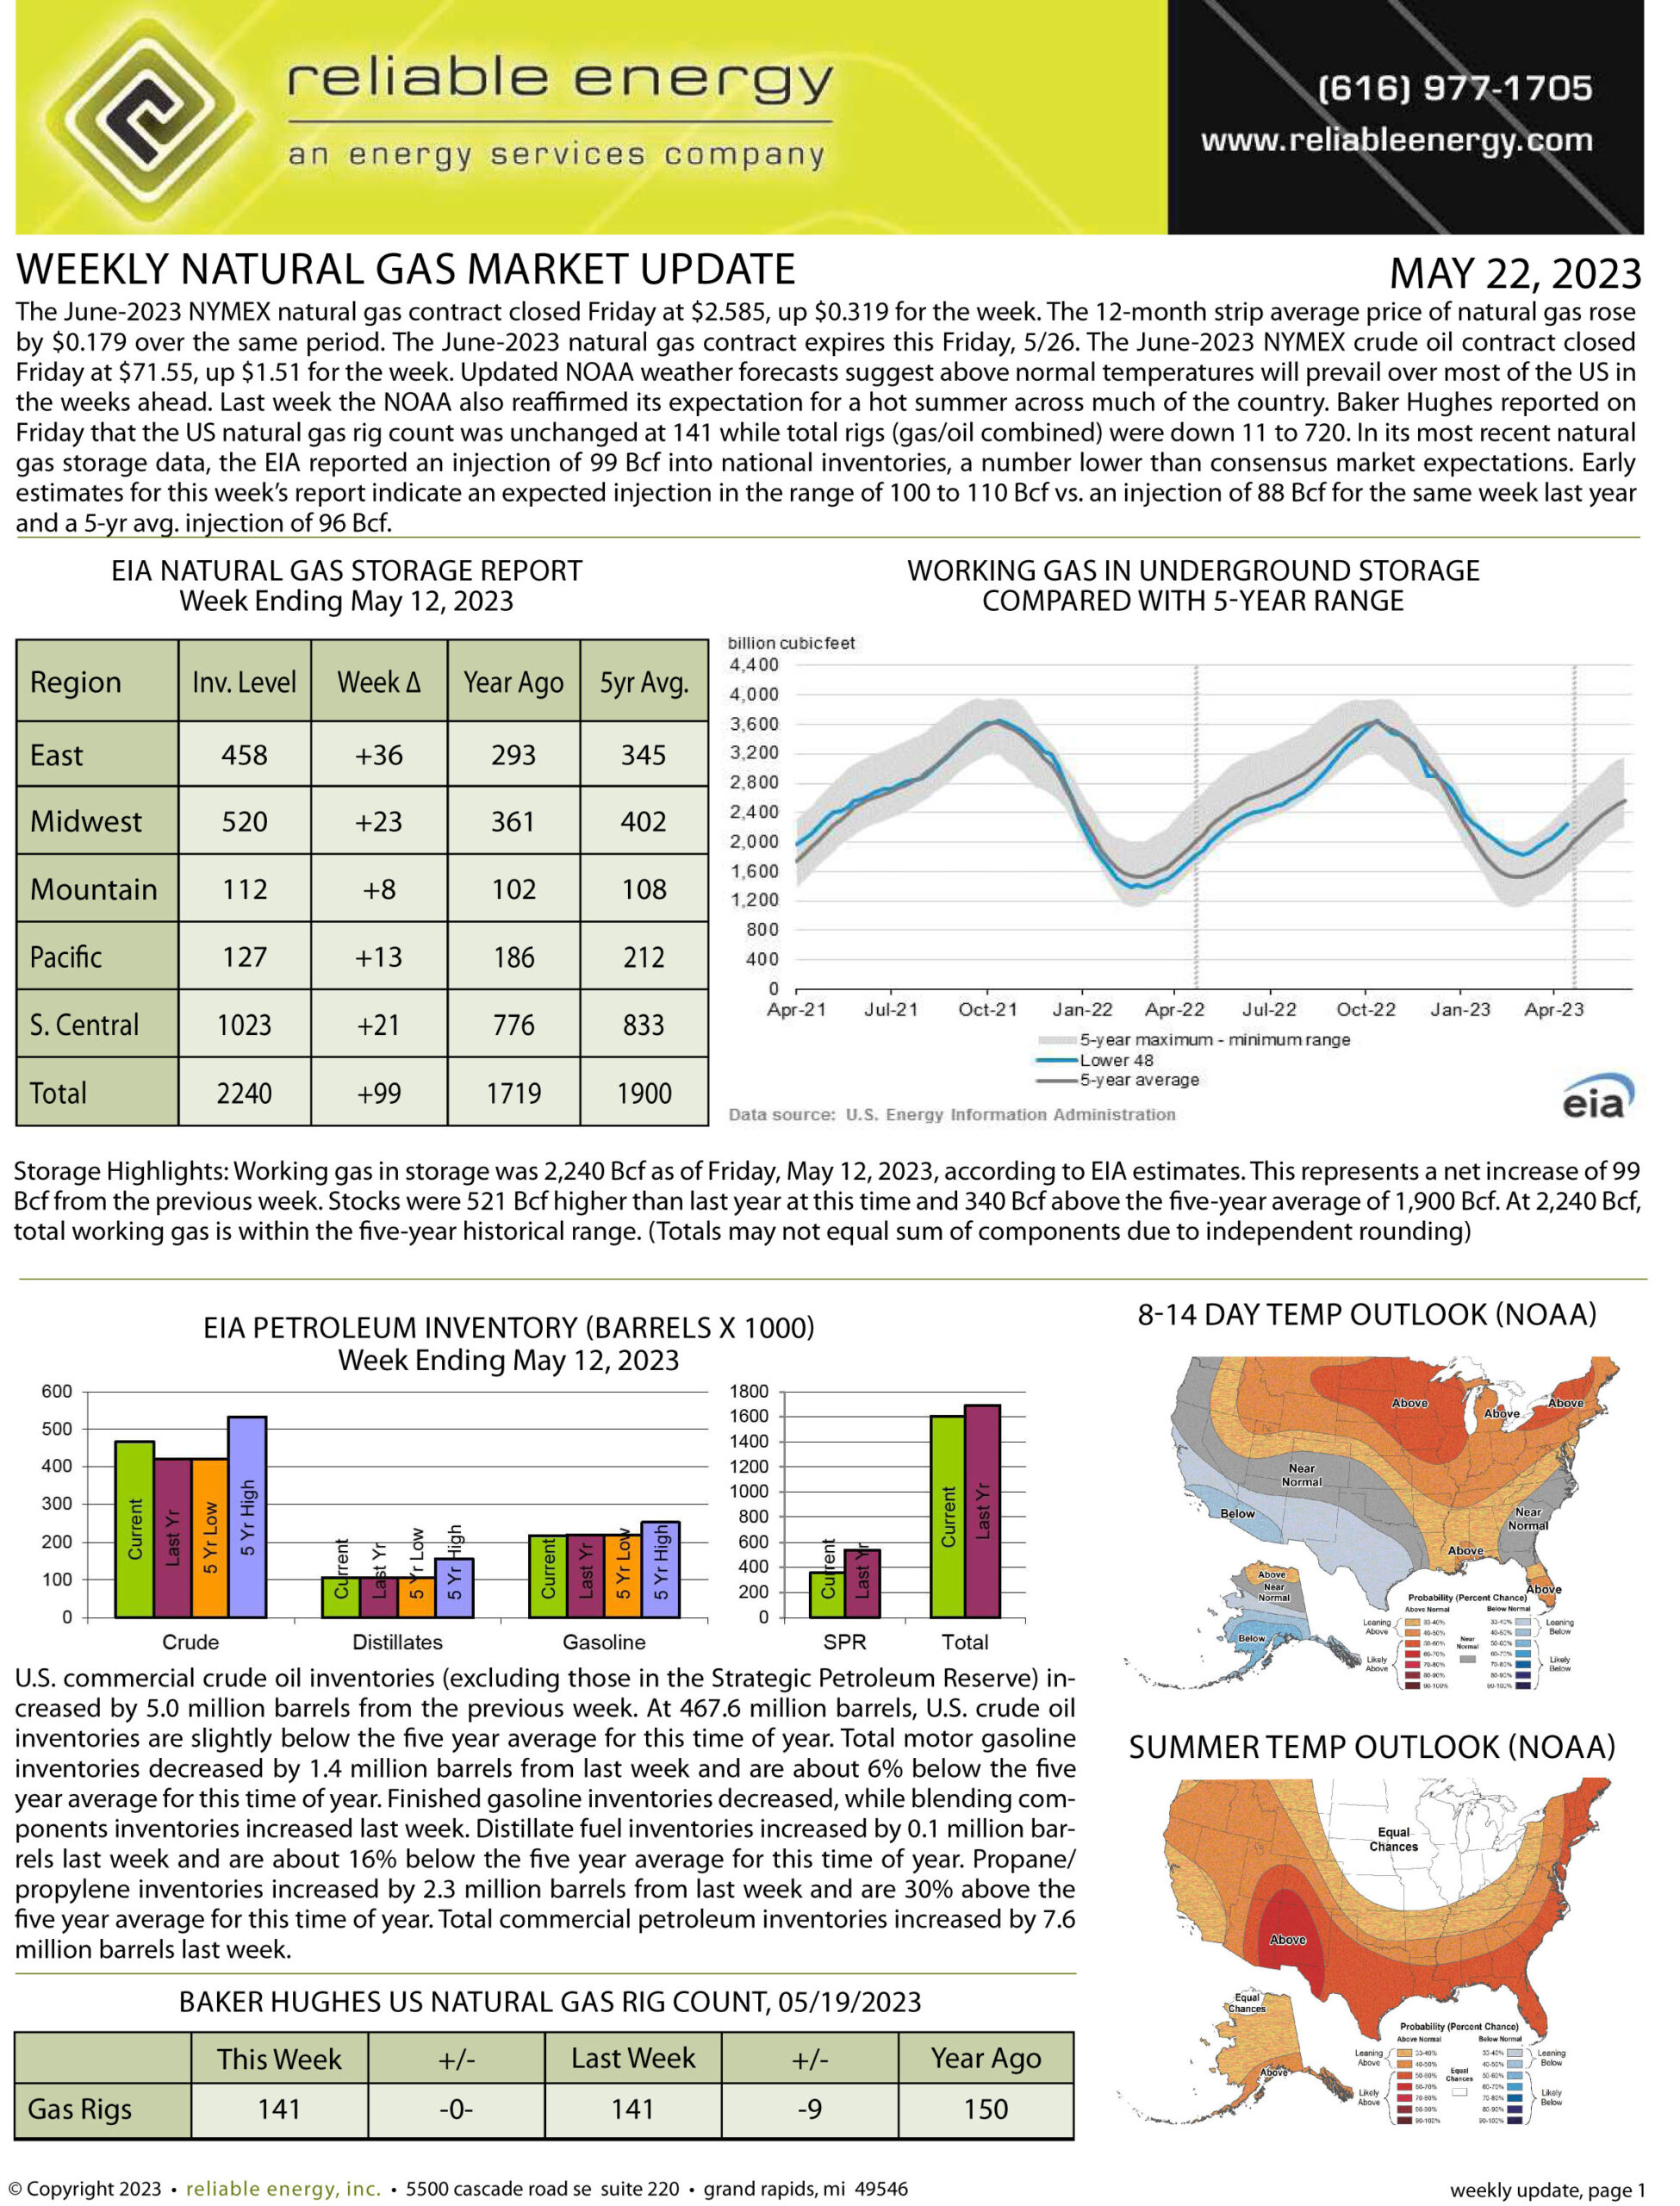 Natural Gas Market Update – May 22, 2023